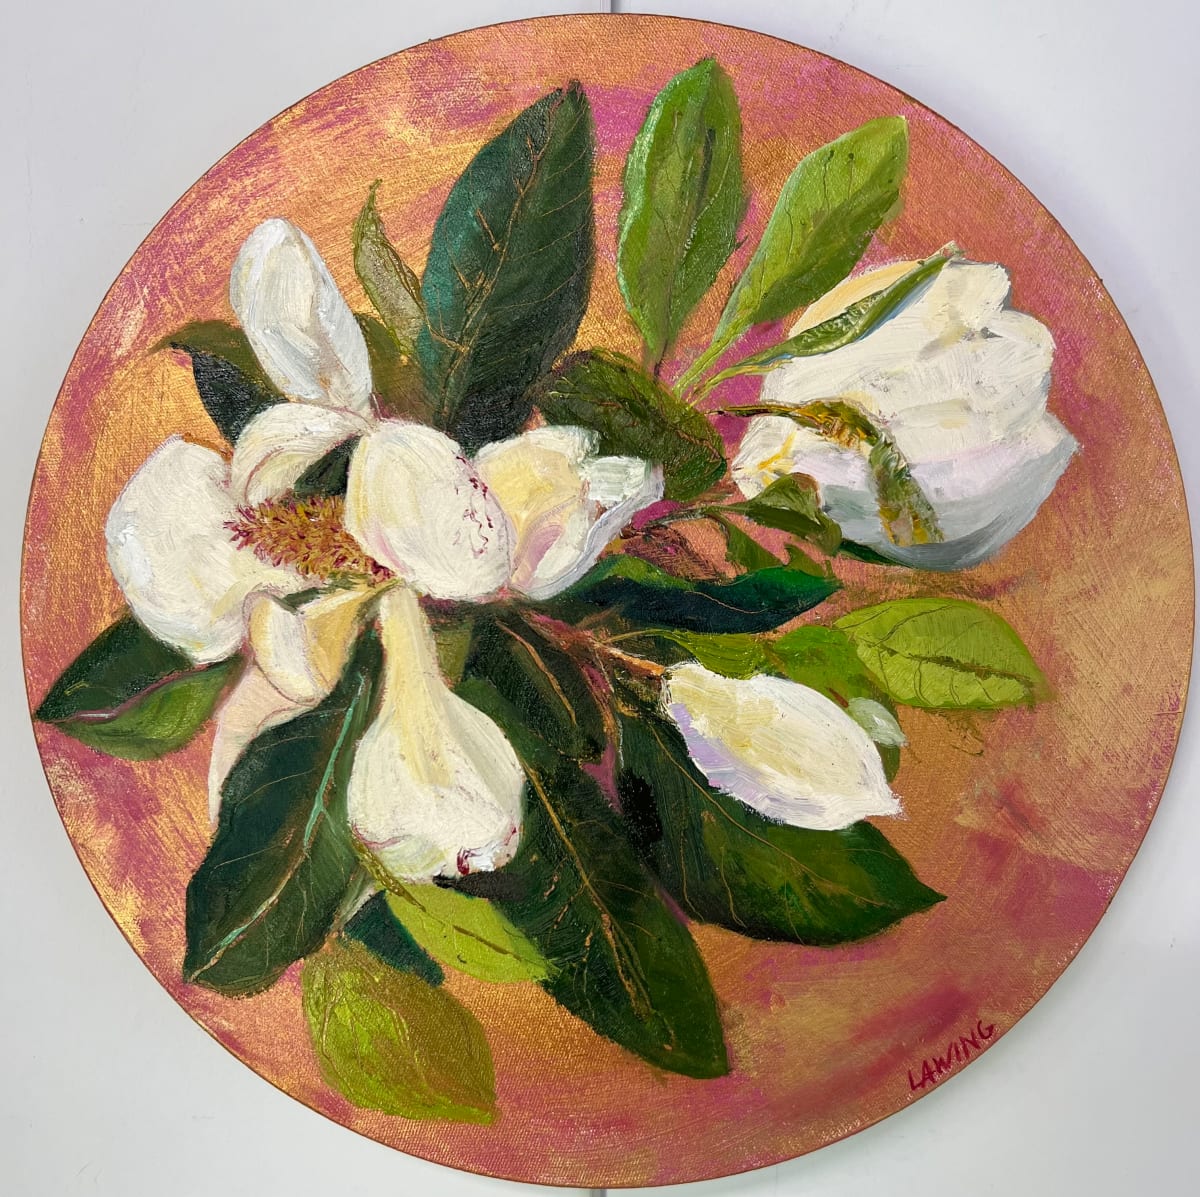 Solstice Bloom by Julia Chandler Lawing  Image: Magnolia blossoms, the sweet scent of summer